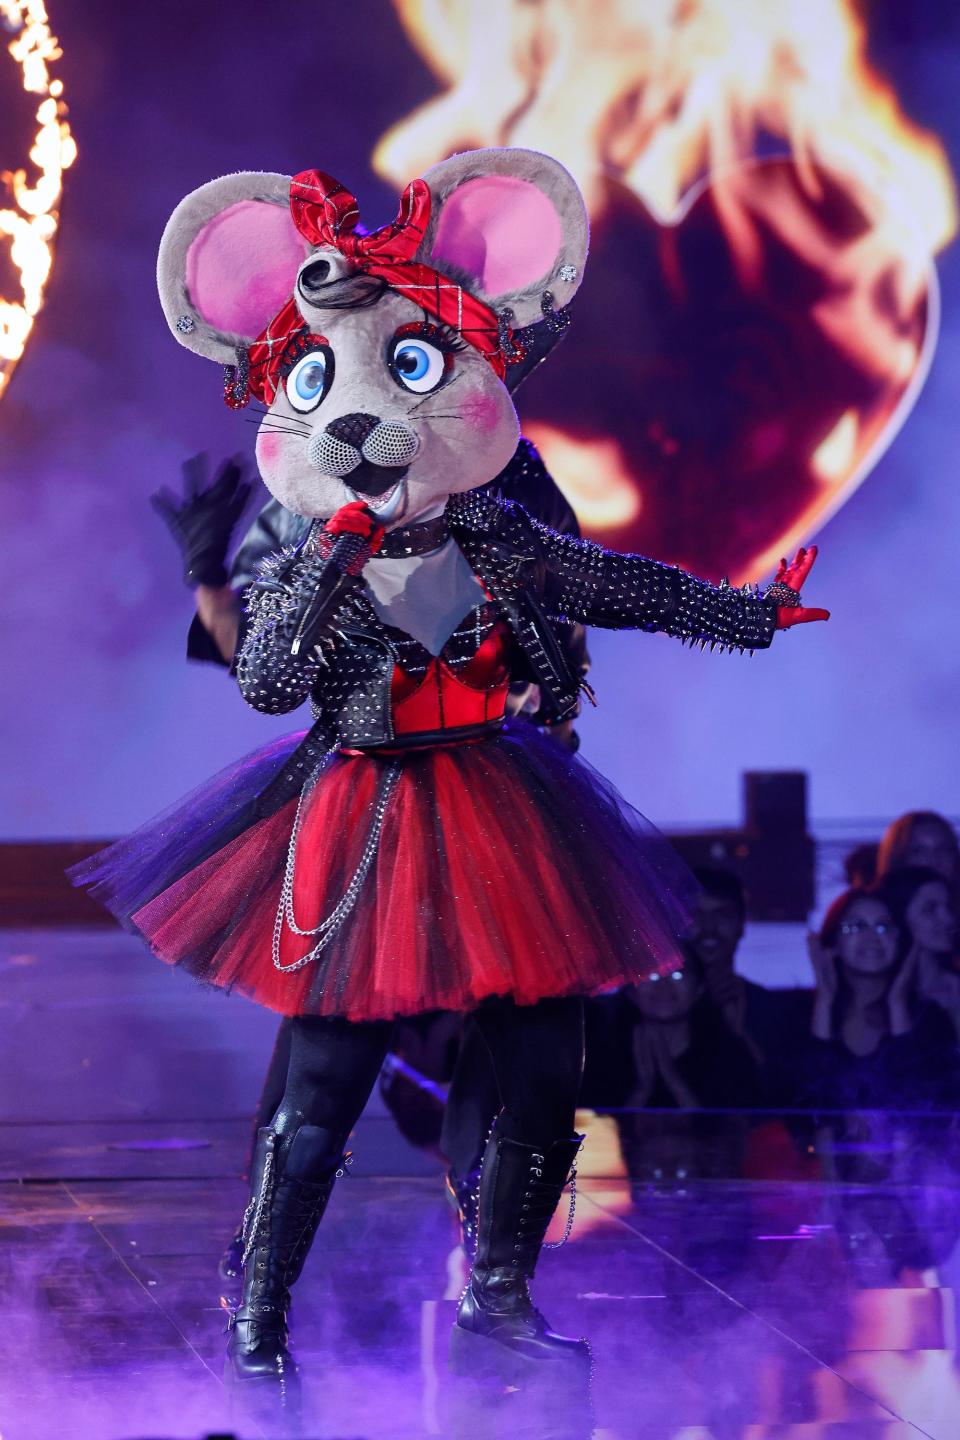 Demi Lovato shocked the panelists on "The Masked Singer" when they made a surprise appearance as Anonymouse on the reality-competition series.